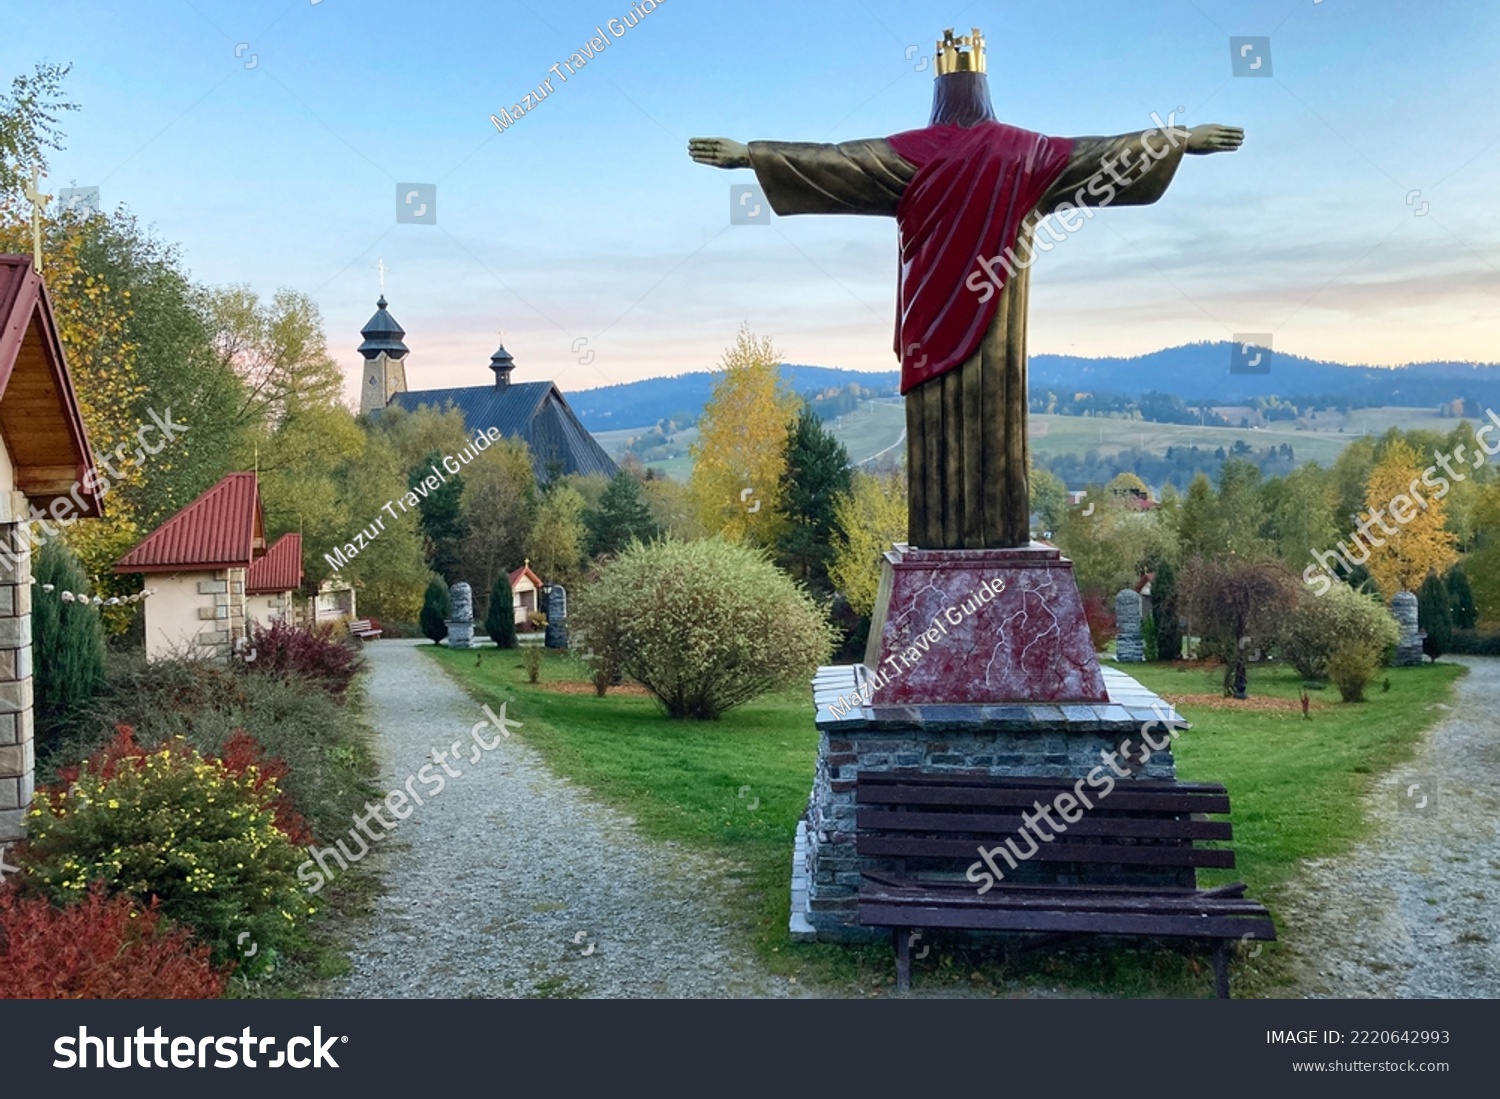 Symbolic Golgotha mountain in Tylicz town, Malopolska Voivodeships of Poland. Church of the Holy. Ap. Peter and Paul in Tylich town, Lesser Poland region #2220642993